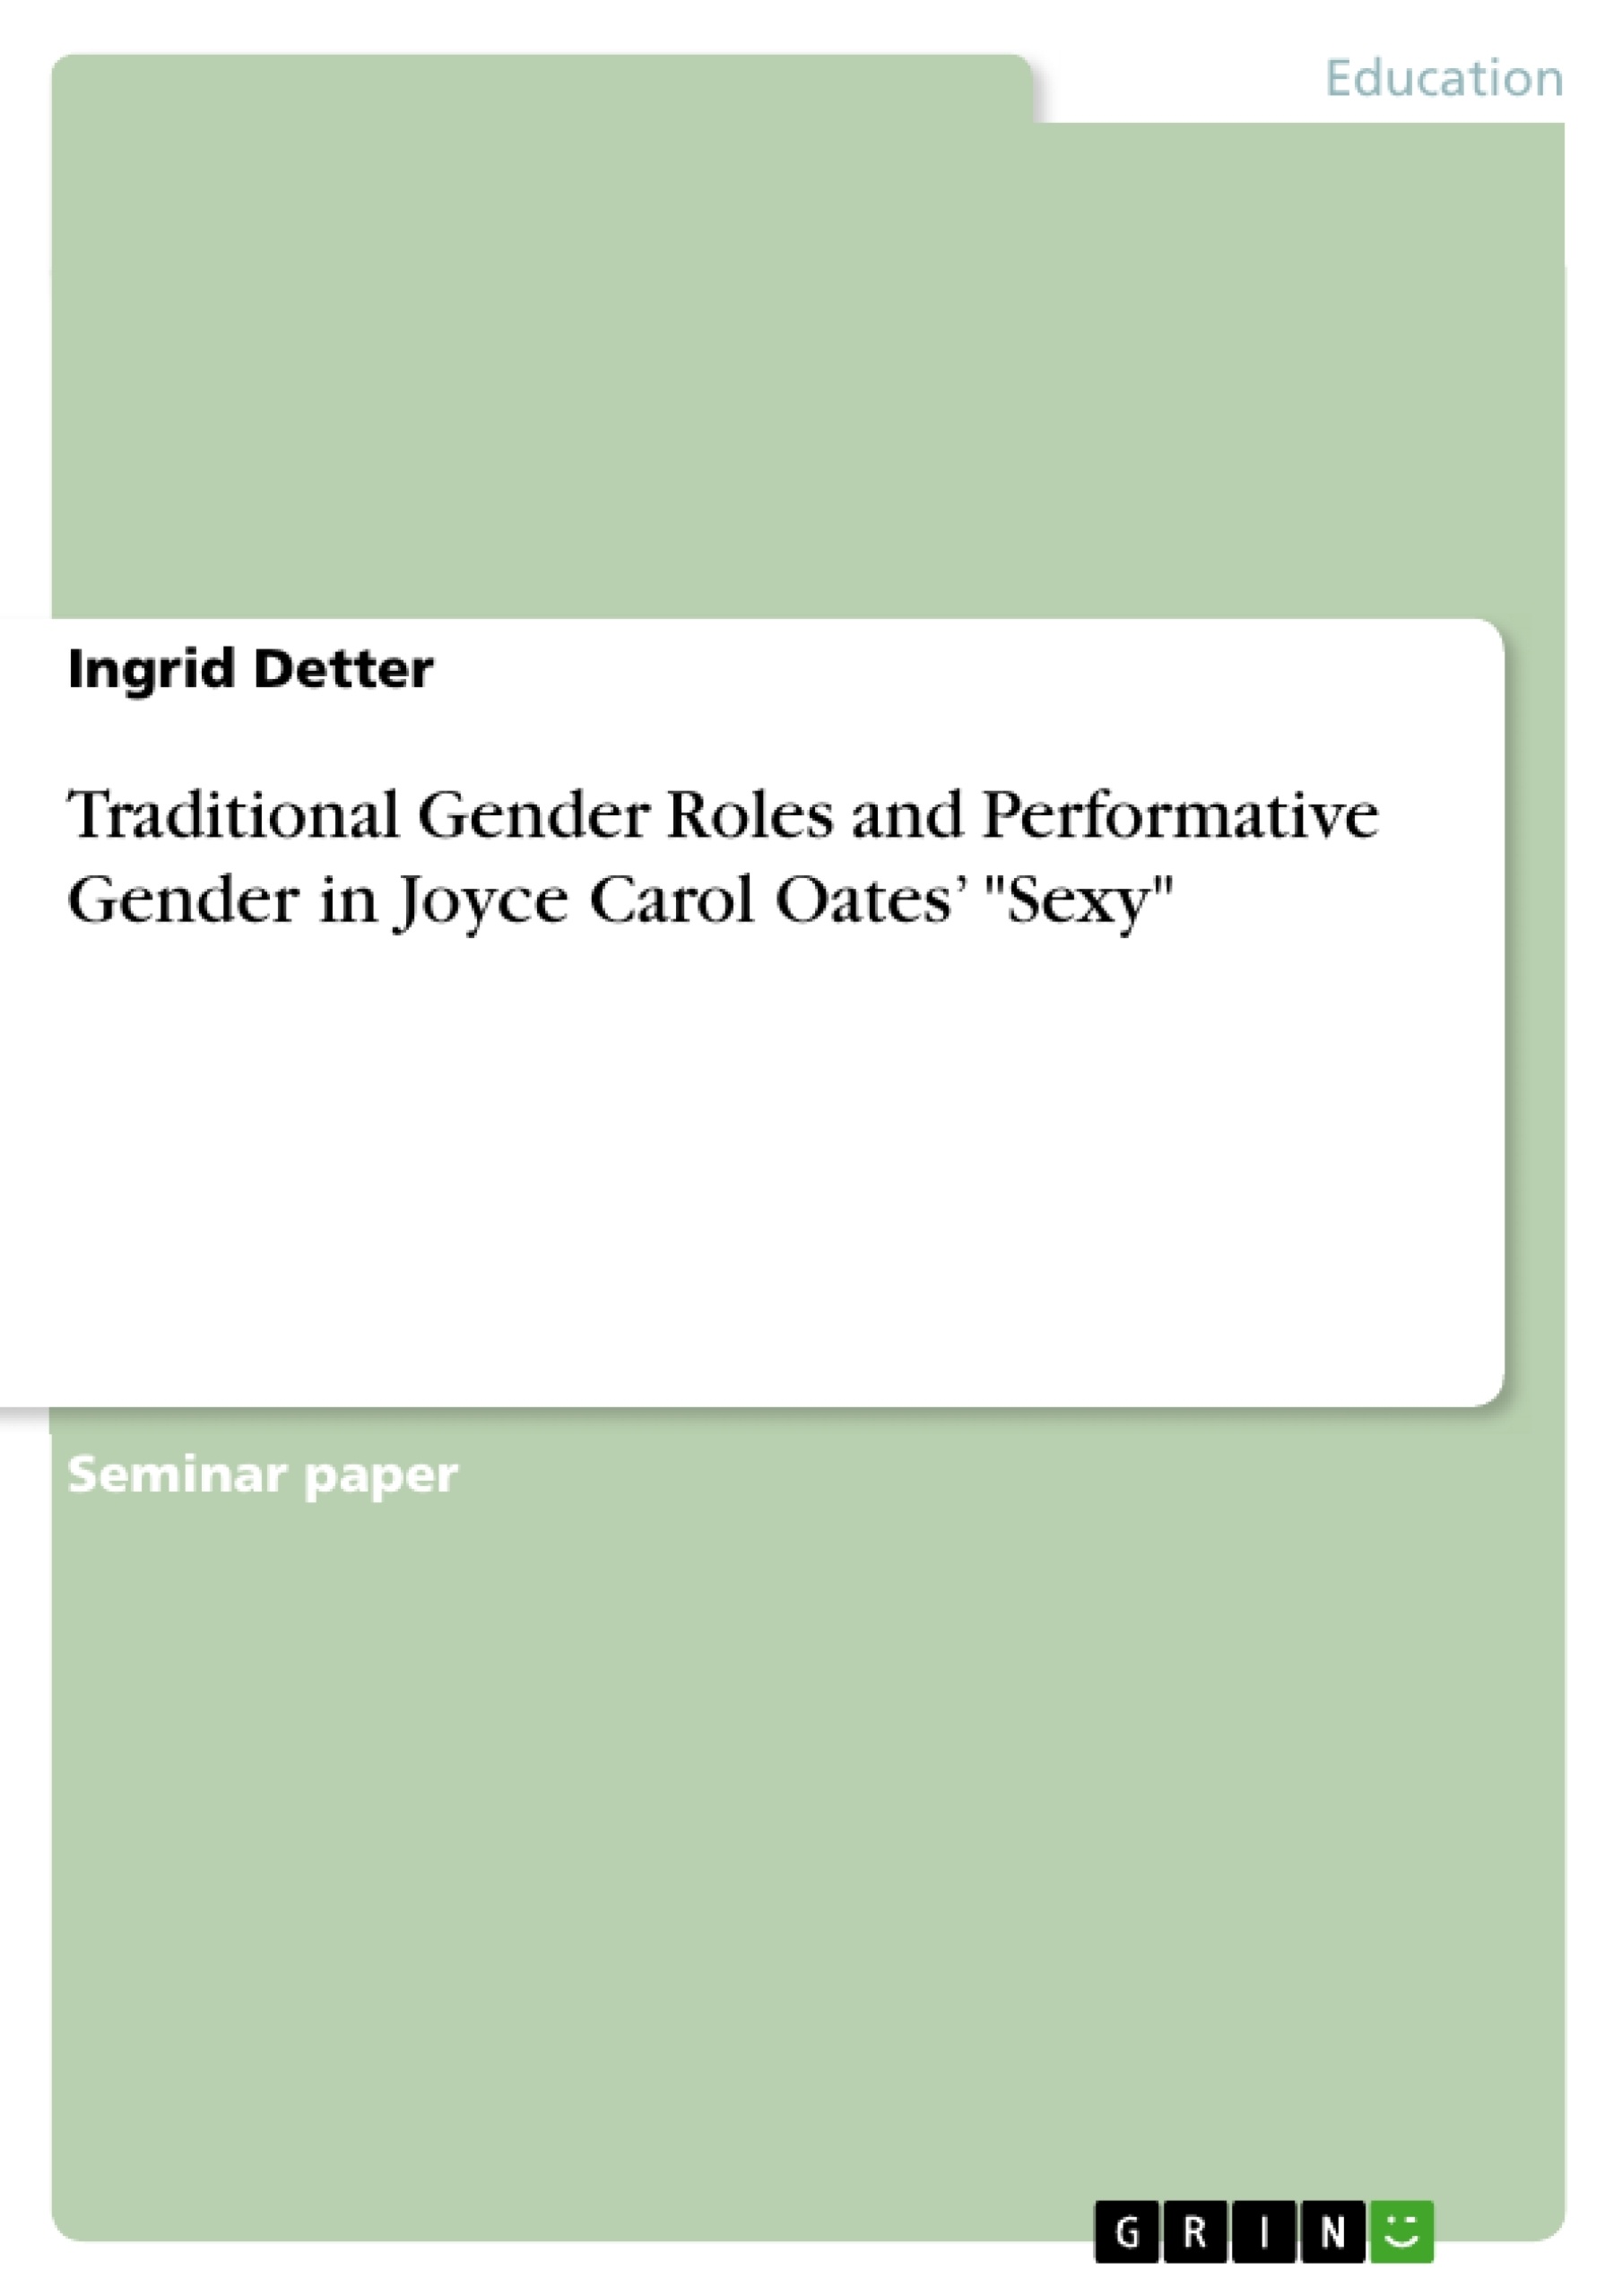 Title: Traditional Gender Roles and Performative Gender in Joyce Carol Oates’ "Sexy"